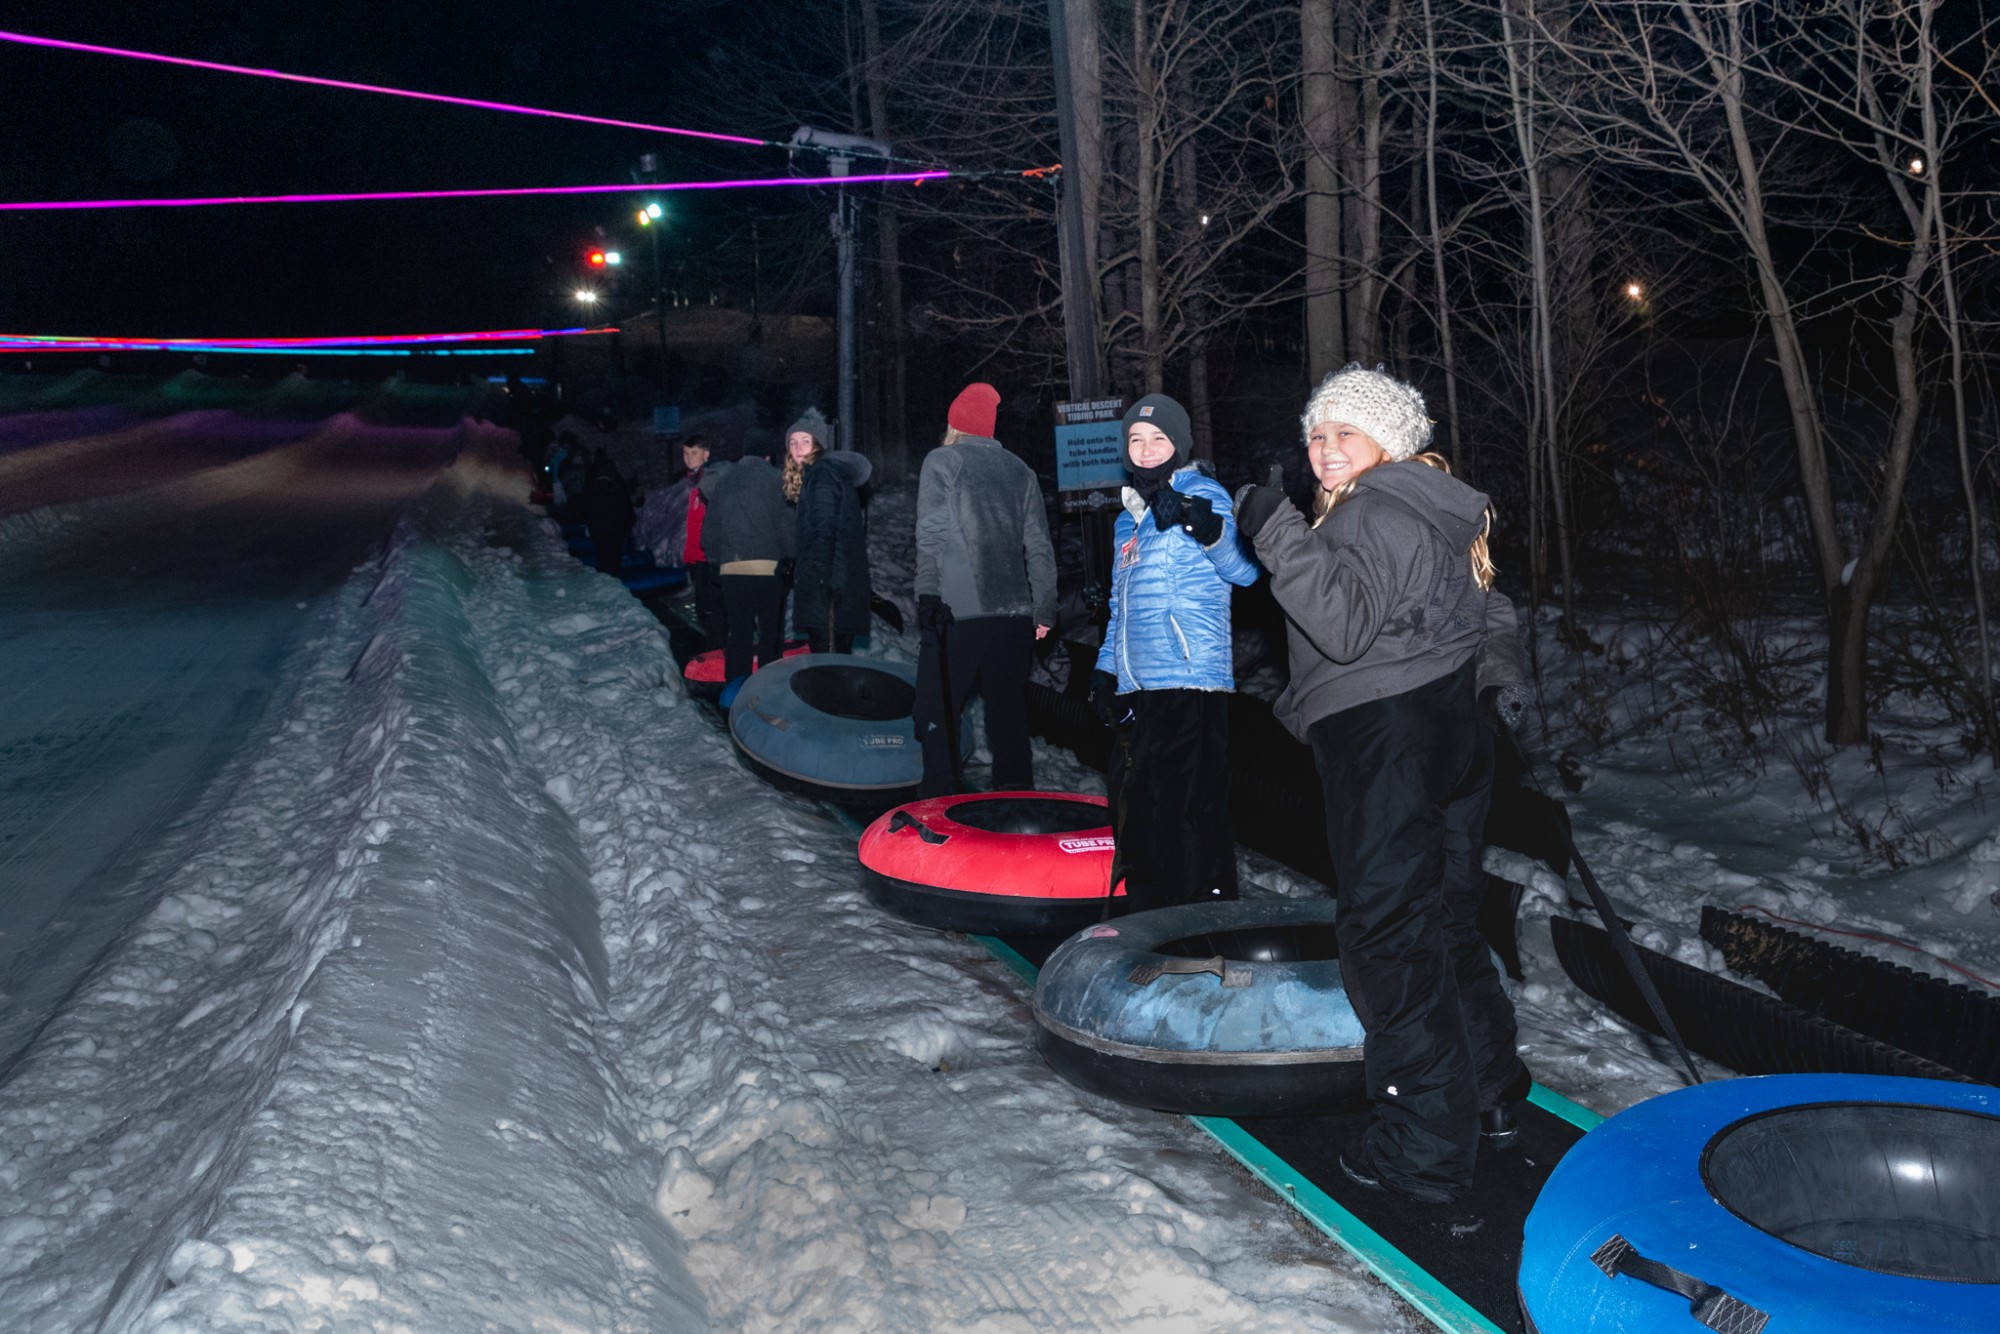 Conveyor Carpet Lift Ride during Will Tube For Food Under Glow Tubing LED Lights at Snow Trails Vertical Descent Tubing Park